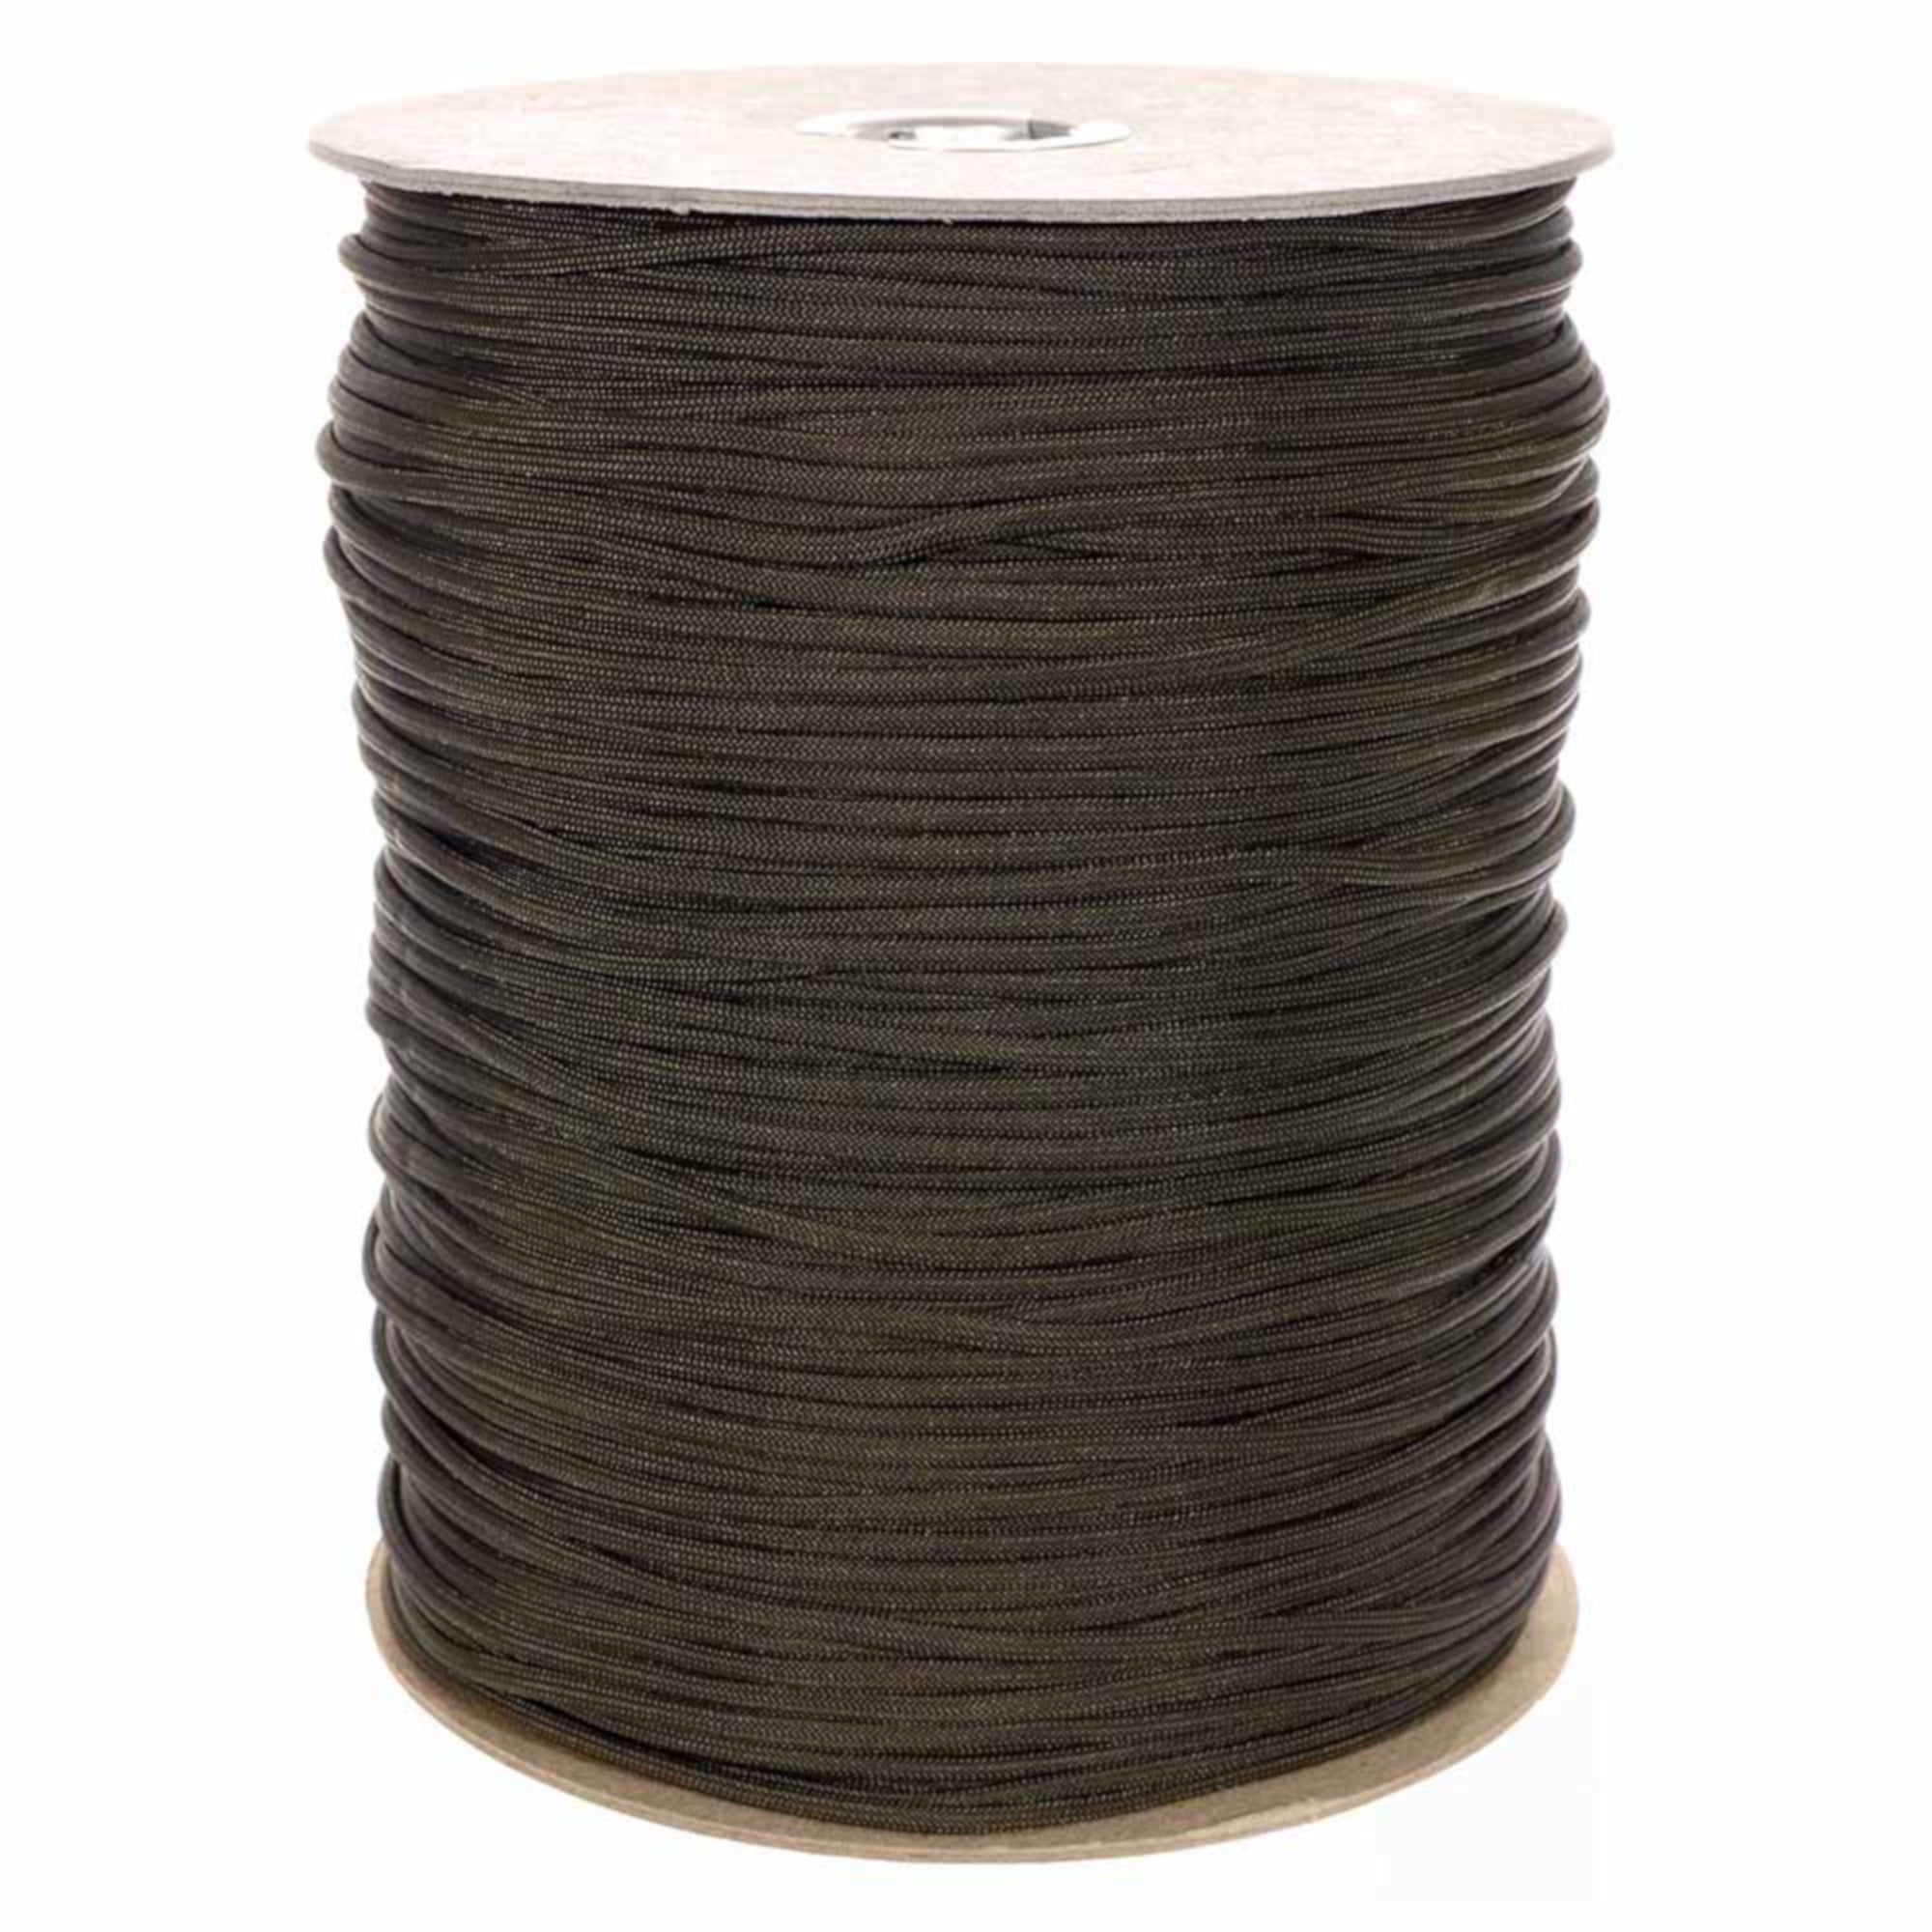 MADE IN USA 300 FT Feet GREEN CAMO 550lb Paracord  Cord Type III 7 Strand 300ft 